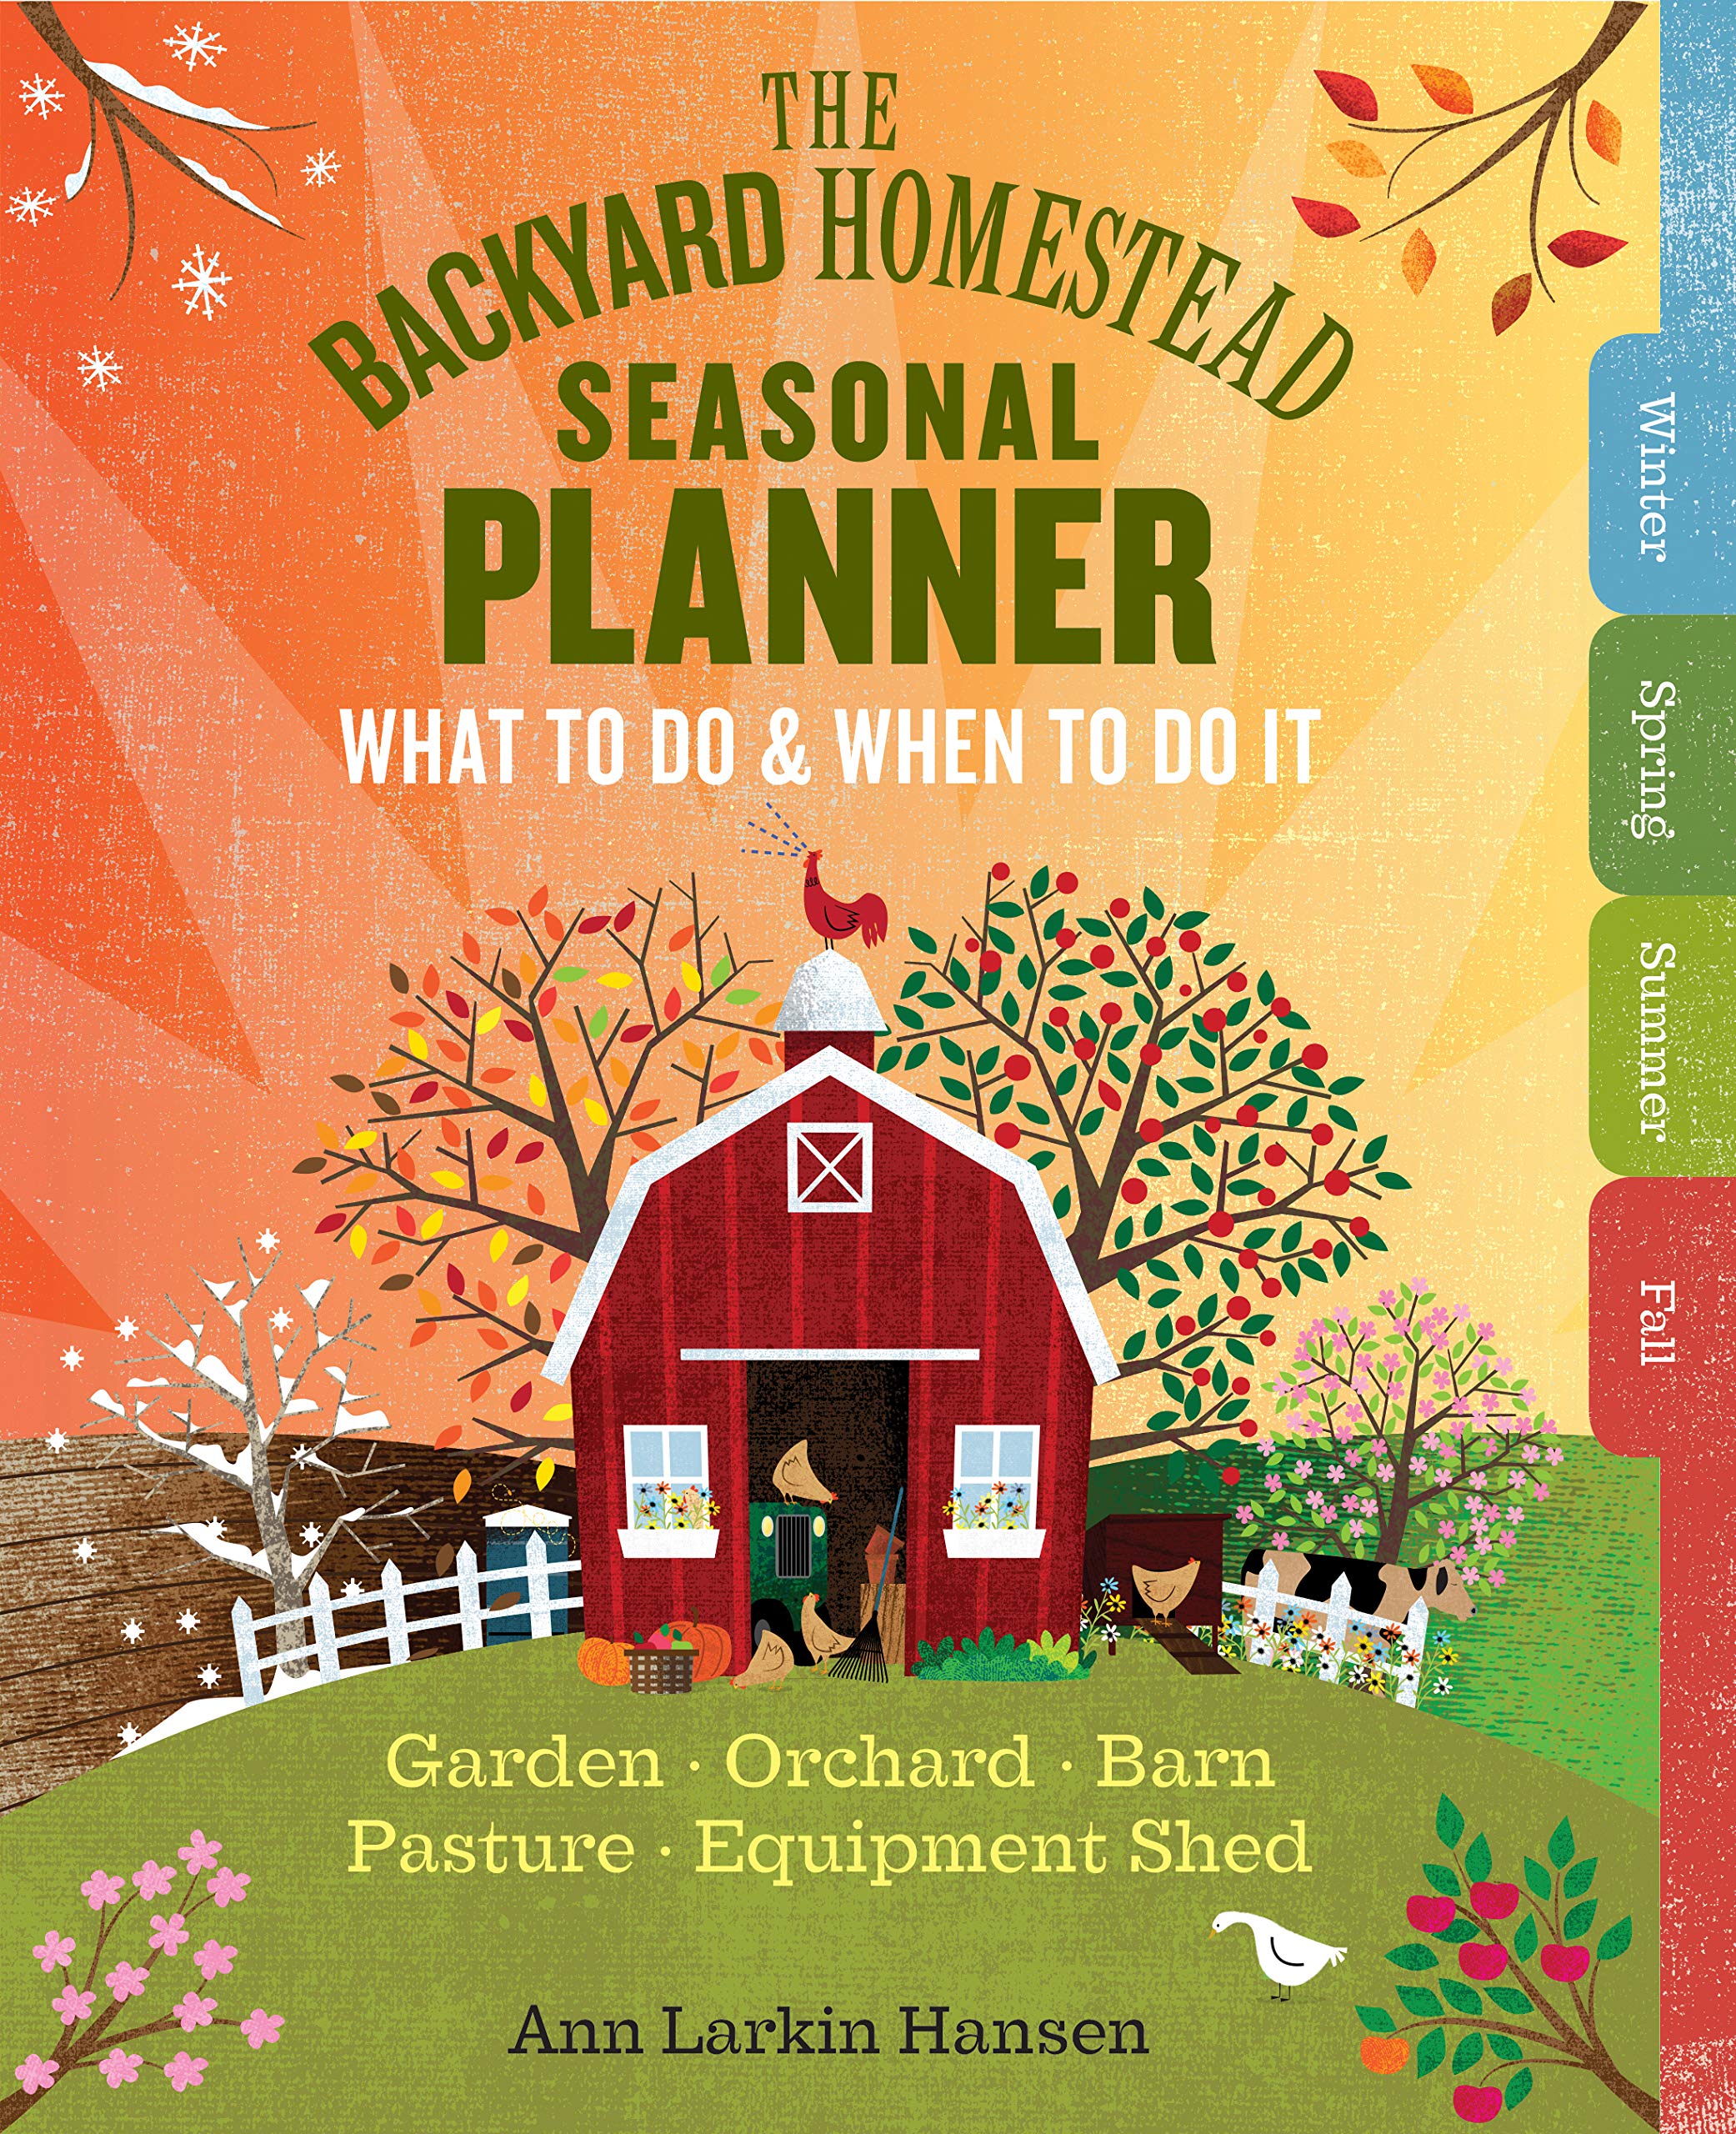 the-backyard-homestead-seasonal-planner-what-to-do-when-to-do-it-in